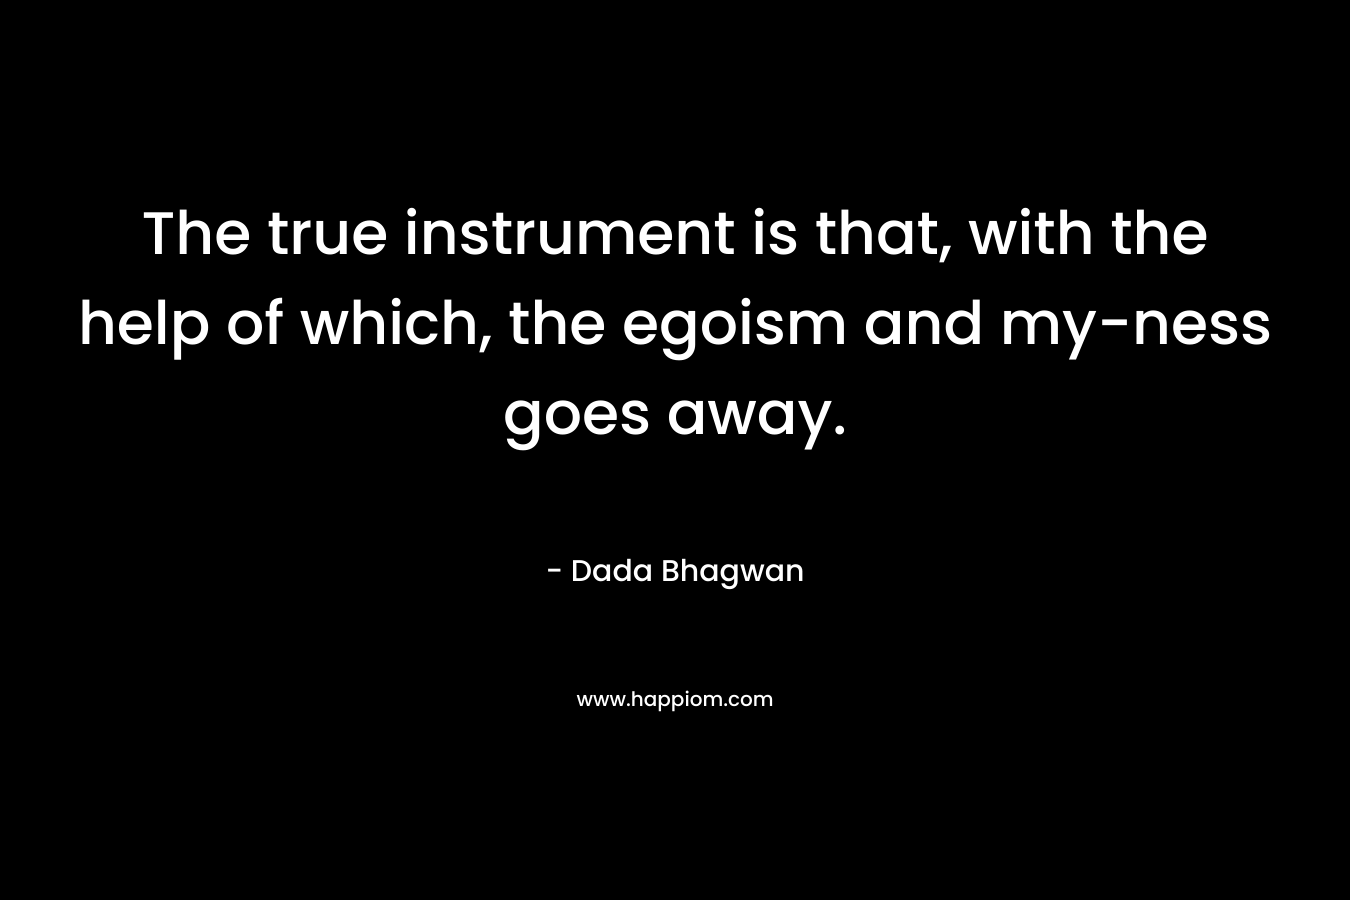 The true instrument is that, with the help of which, the egoism and my-ness goes away.